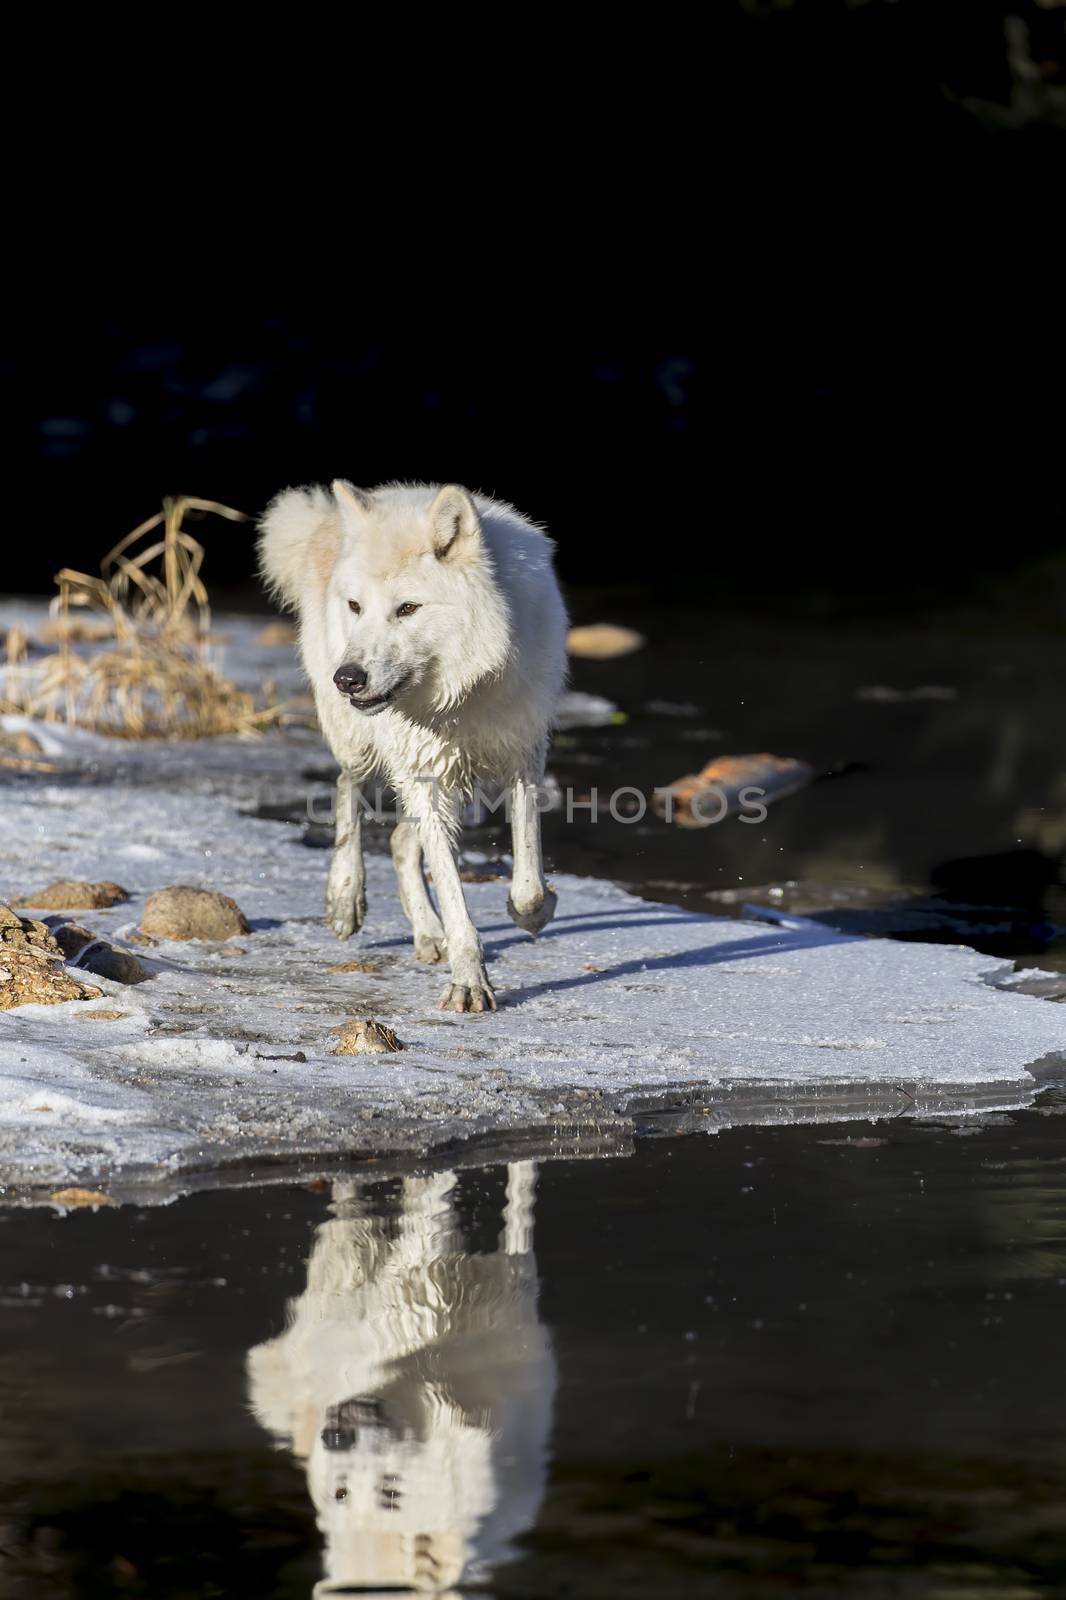 Two Arctic Wolves play around near an icy pond in a snowy forest hunting for prey.